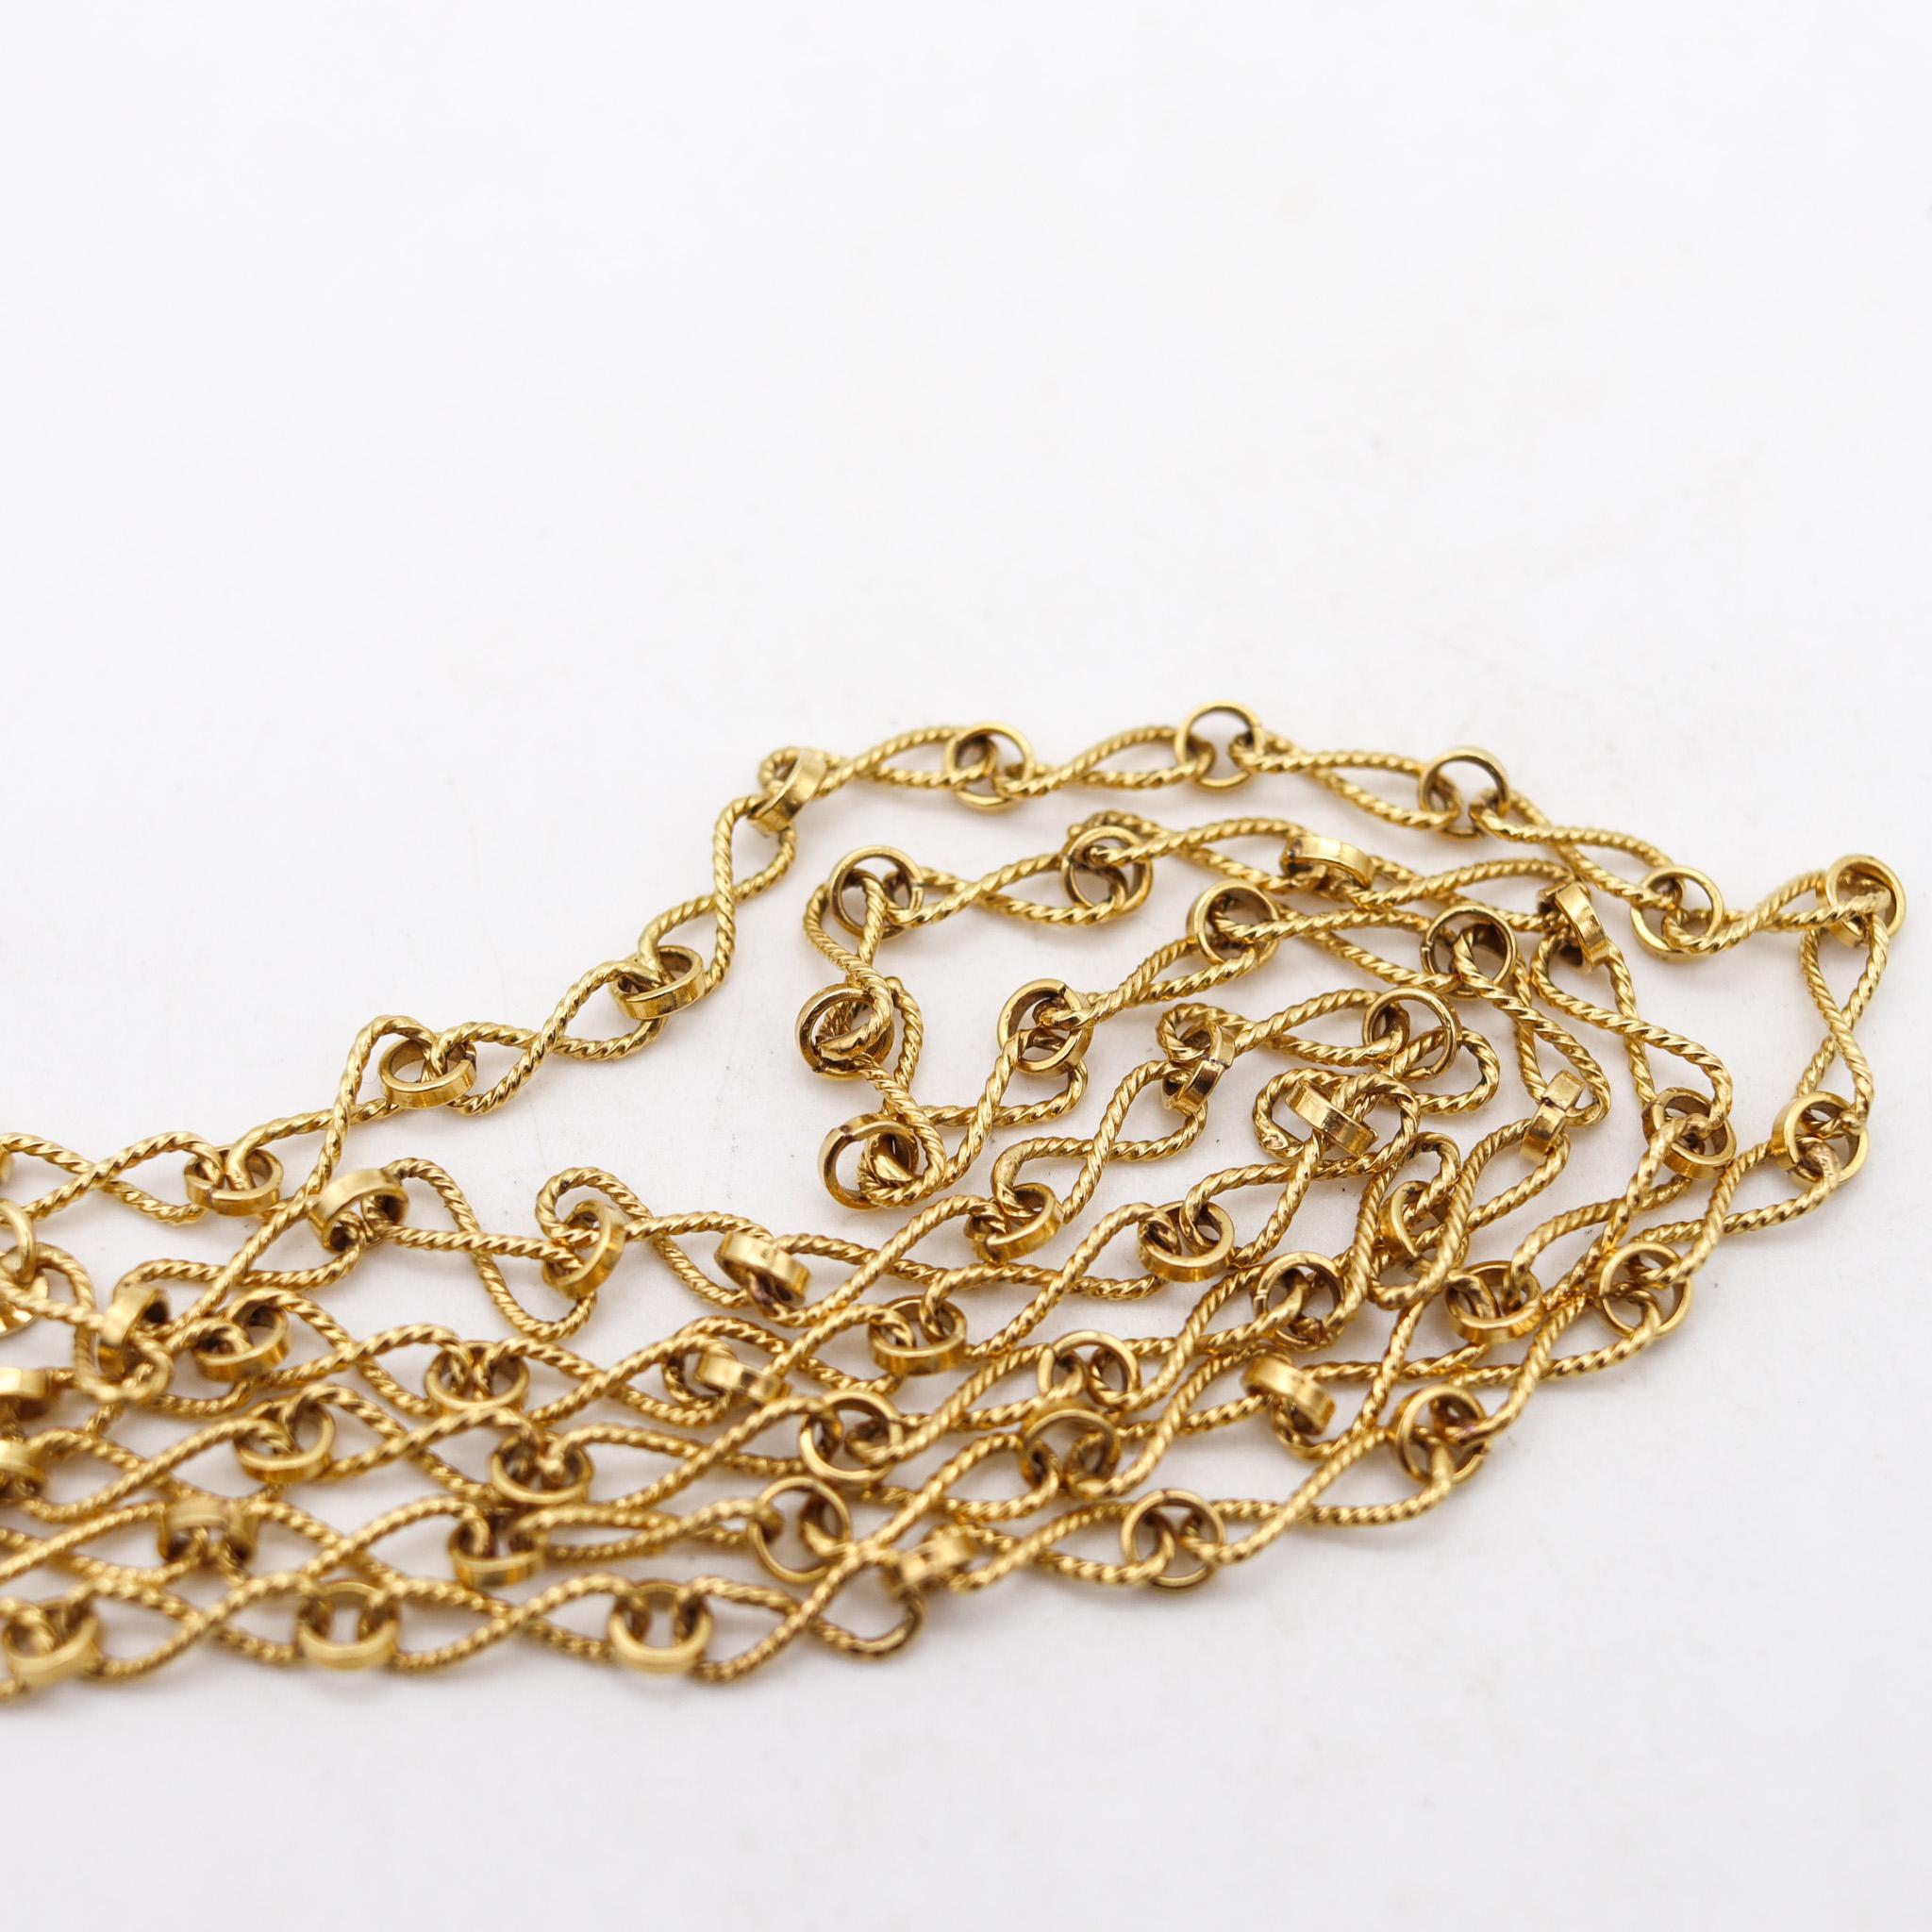 Women's or Men's Alessi Domenico 1970 Retro Modern Twisted Long Chain In Solid 18Kt Yellow Gold For Sale